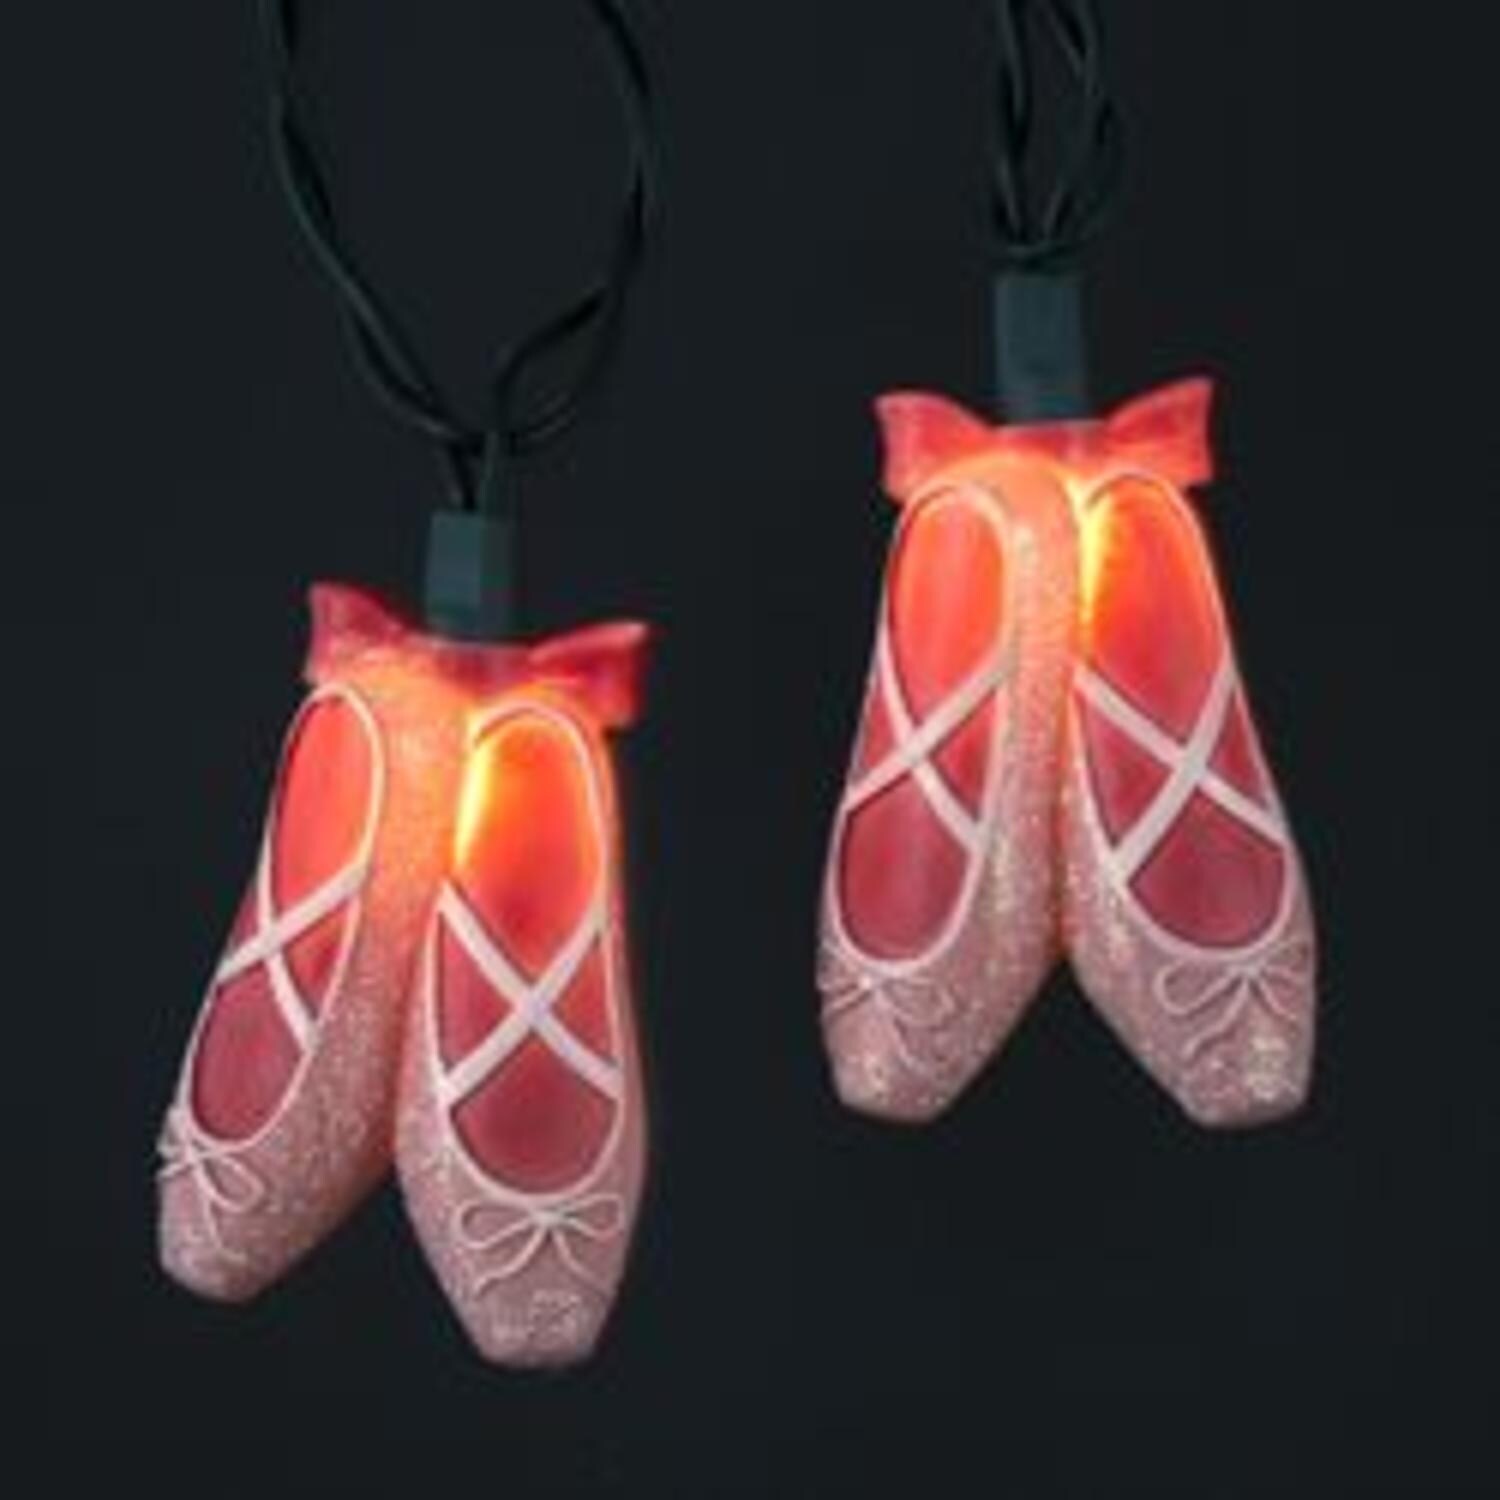 slippers with lights